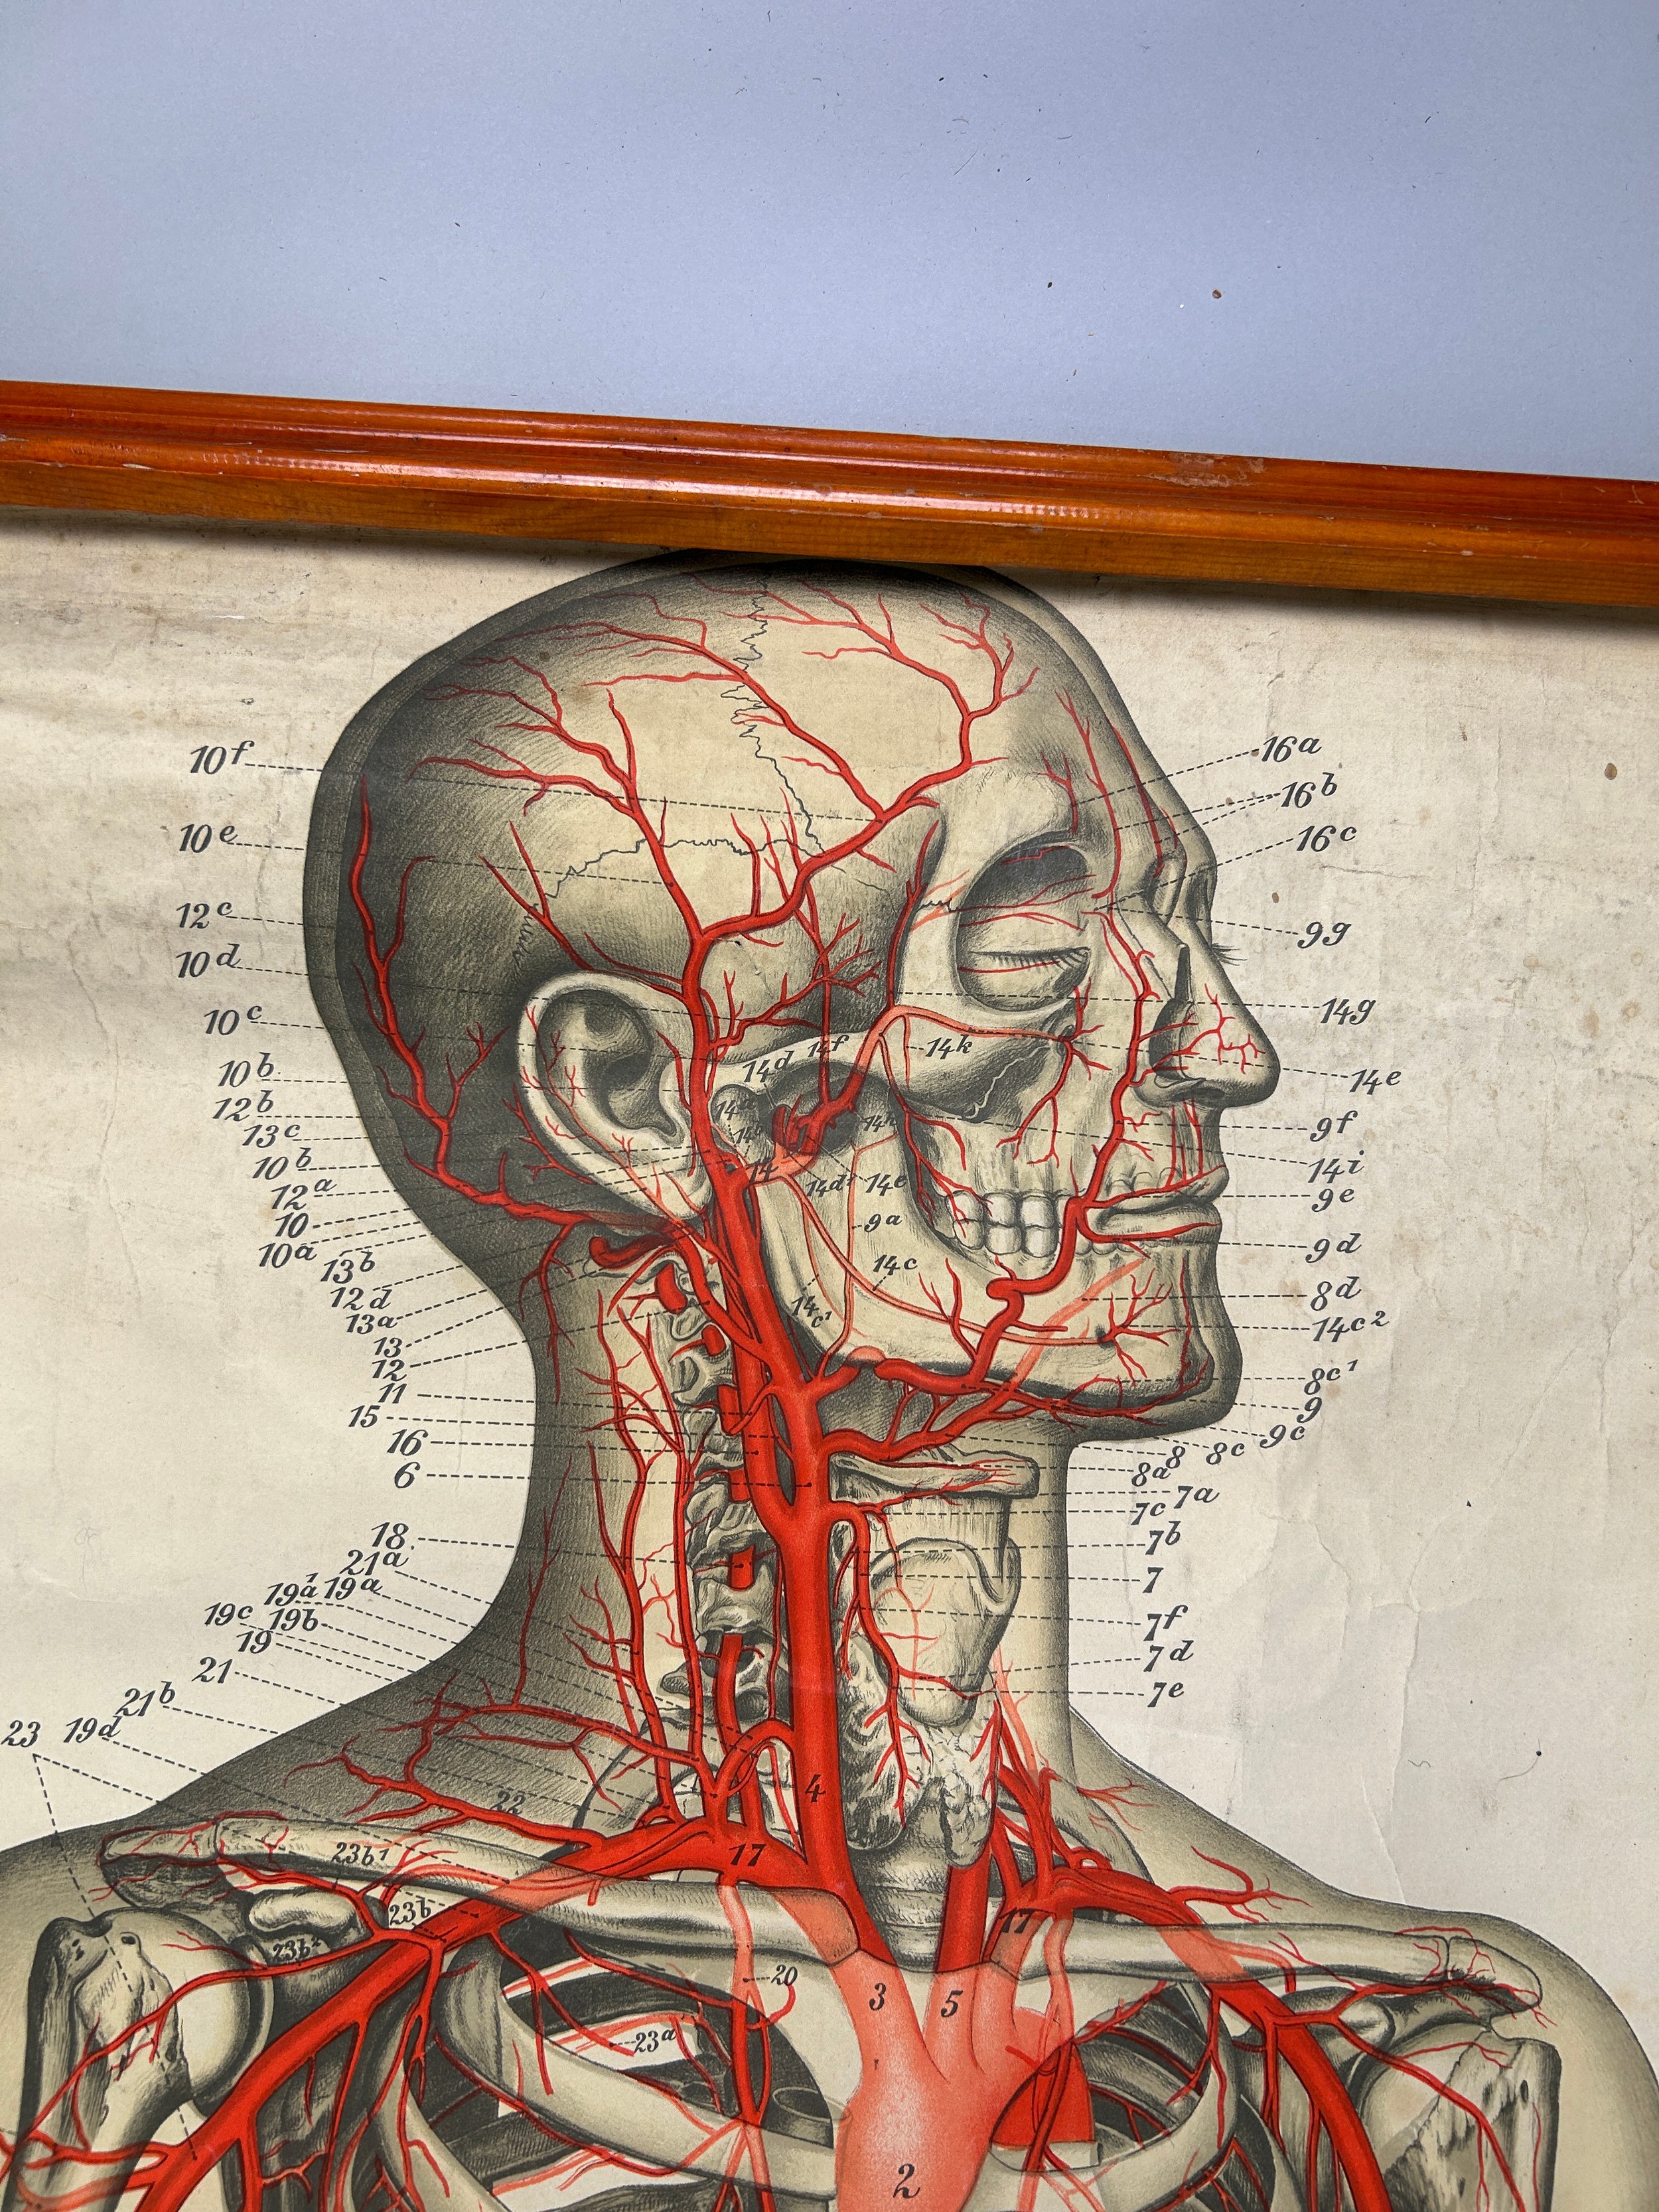 A MEDICAL FROHSE ANATOMICAL CHART 'THE HEART AND CIRCULATORY SYSTEM', hanging scroll by Adam, - Image 4 of 5